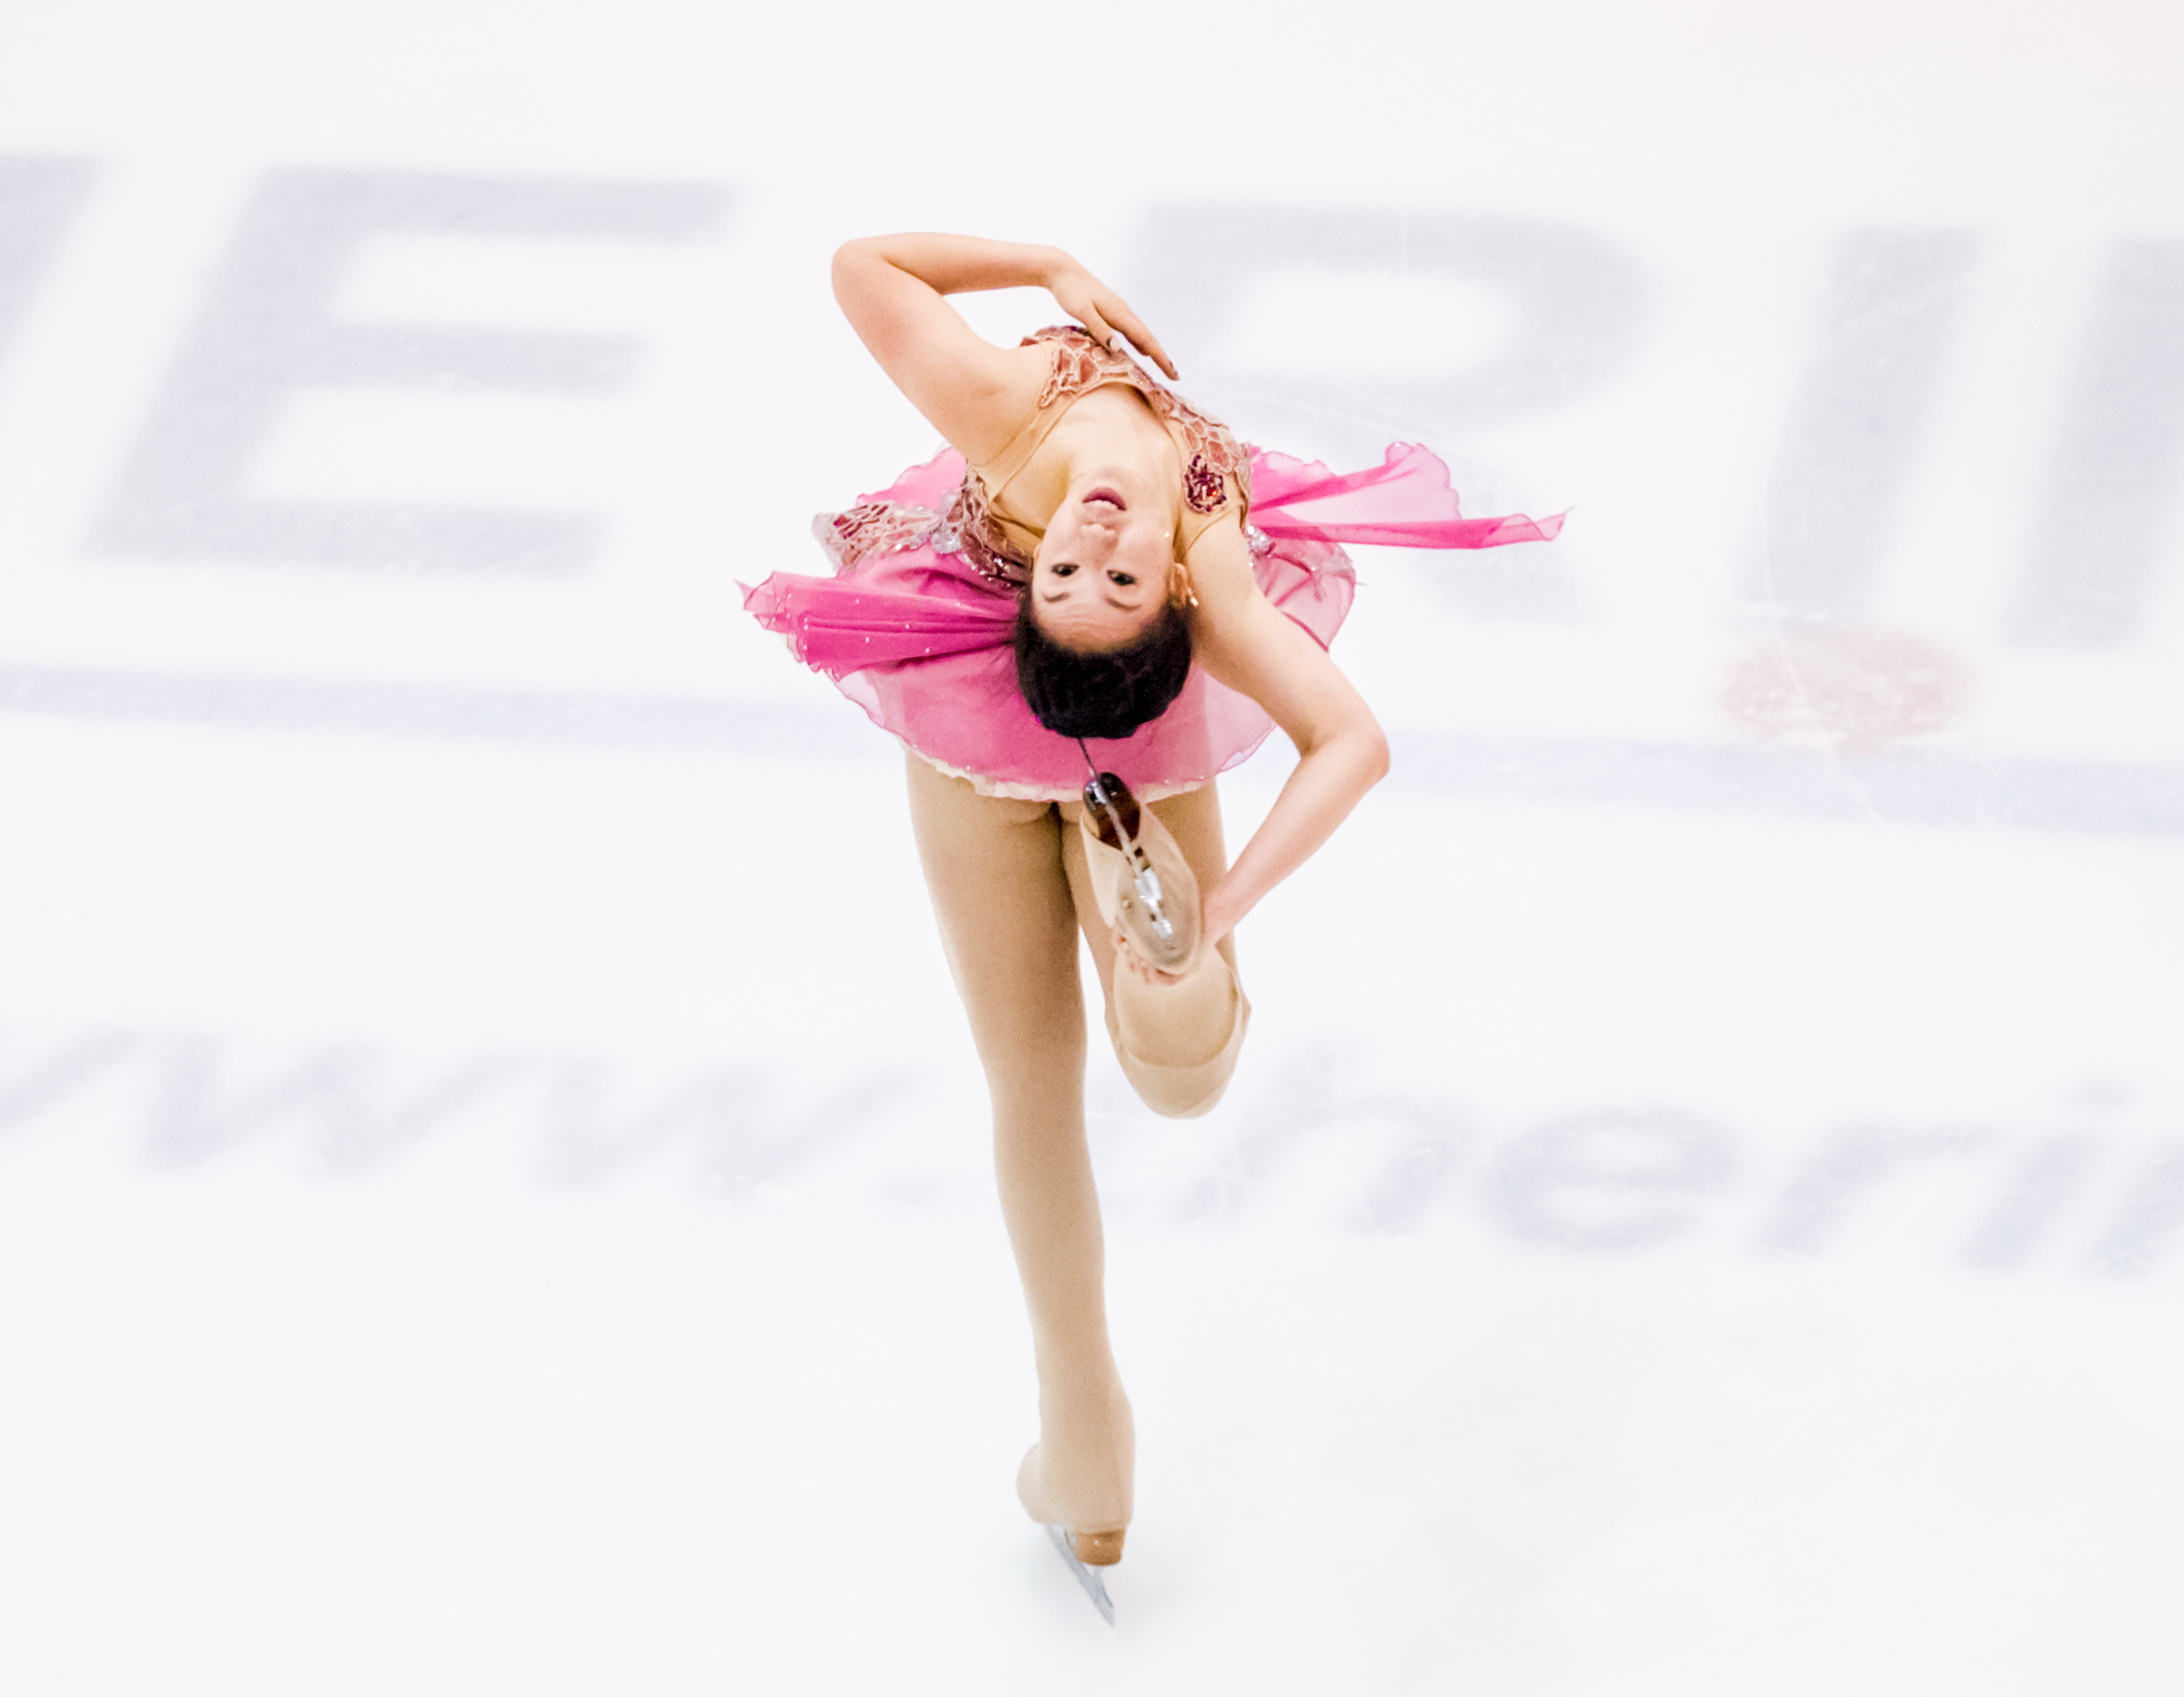 A Singaporean figure skater executes a spin during the Singapore National Championships at the Rink.